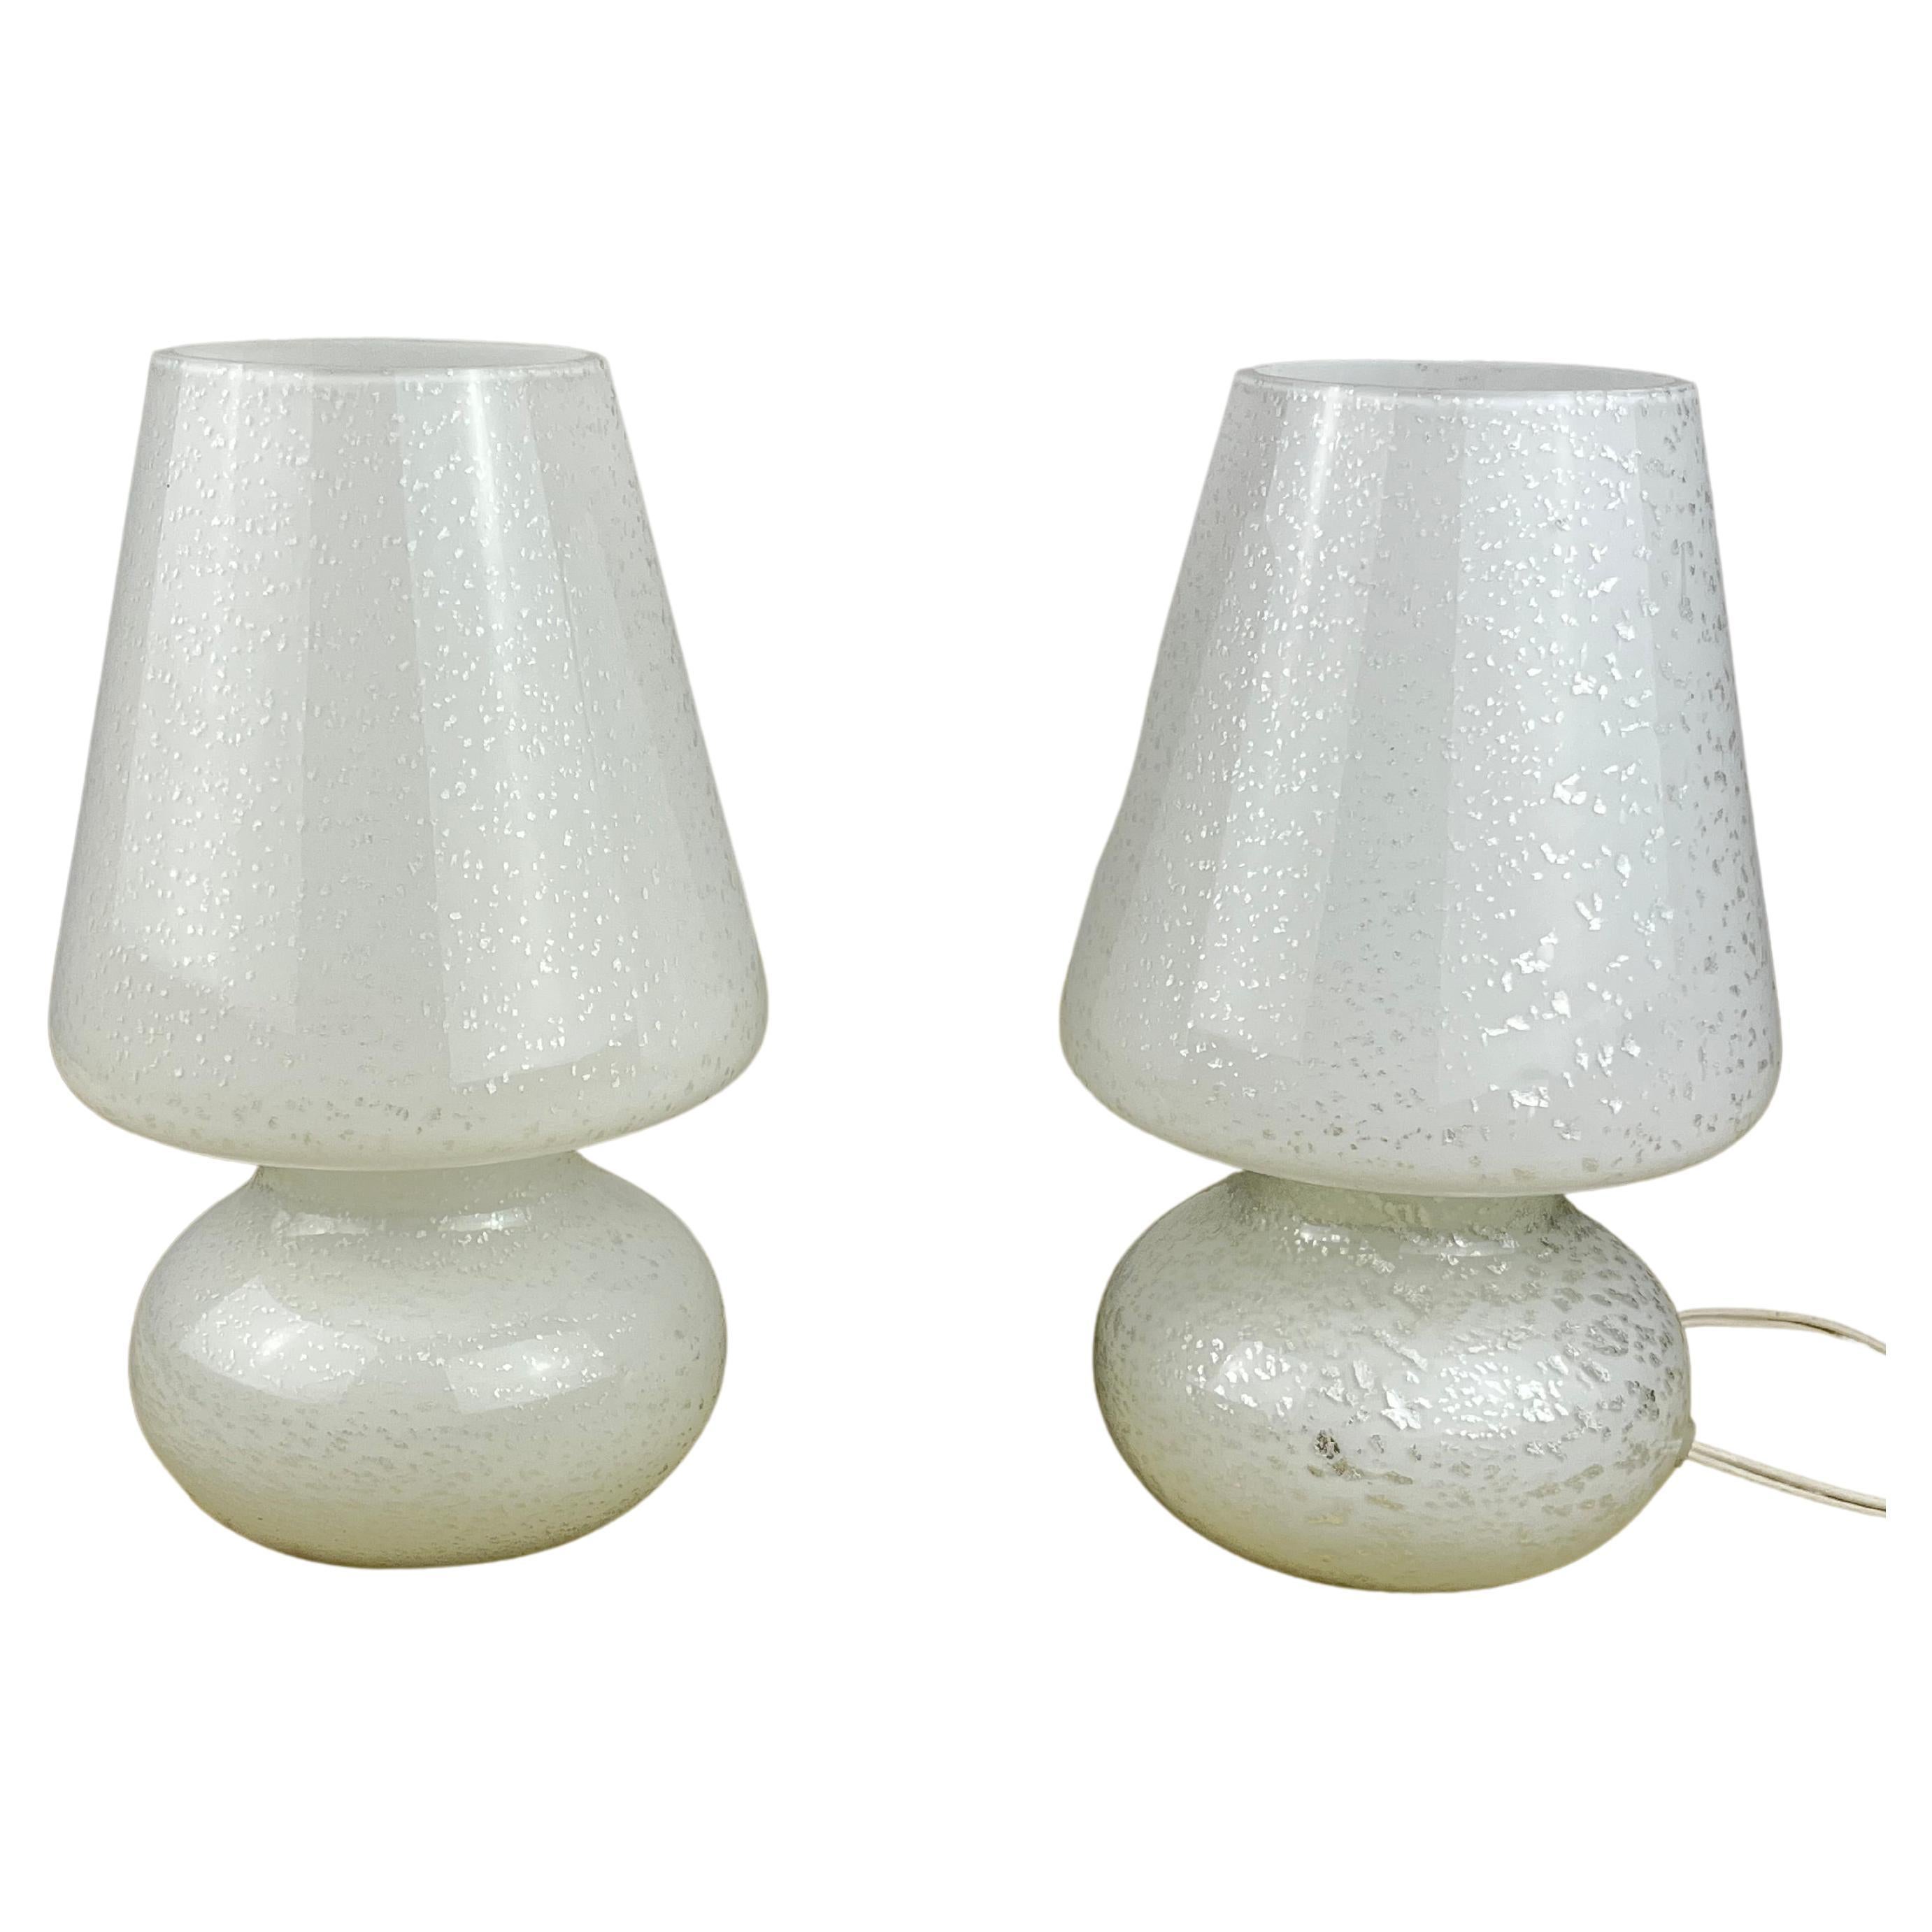 Pair of Murano Glass Bedside Lamps, Italy, 1980s For Sale